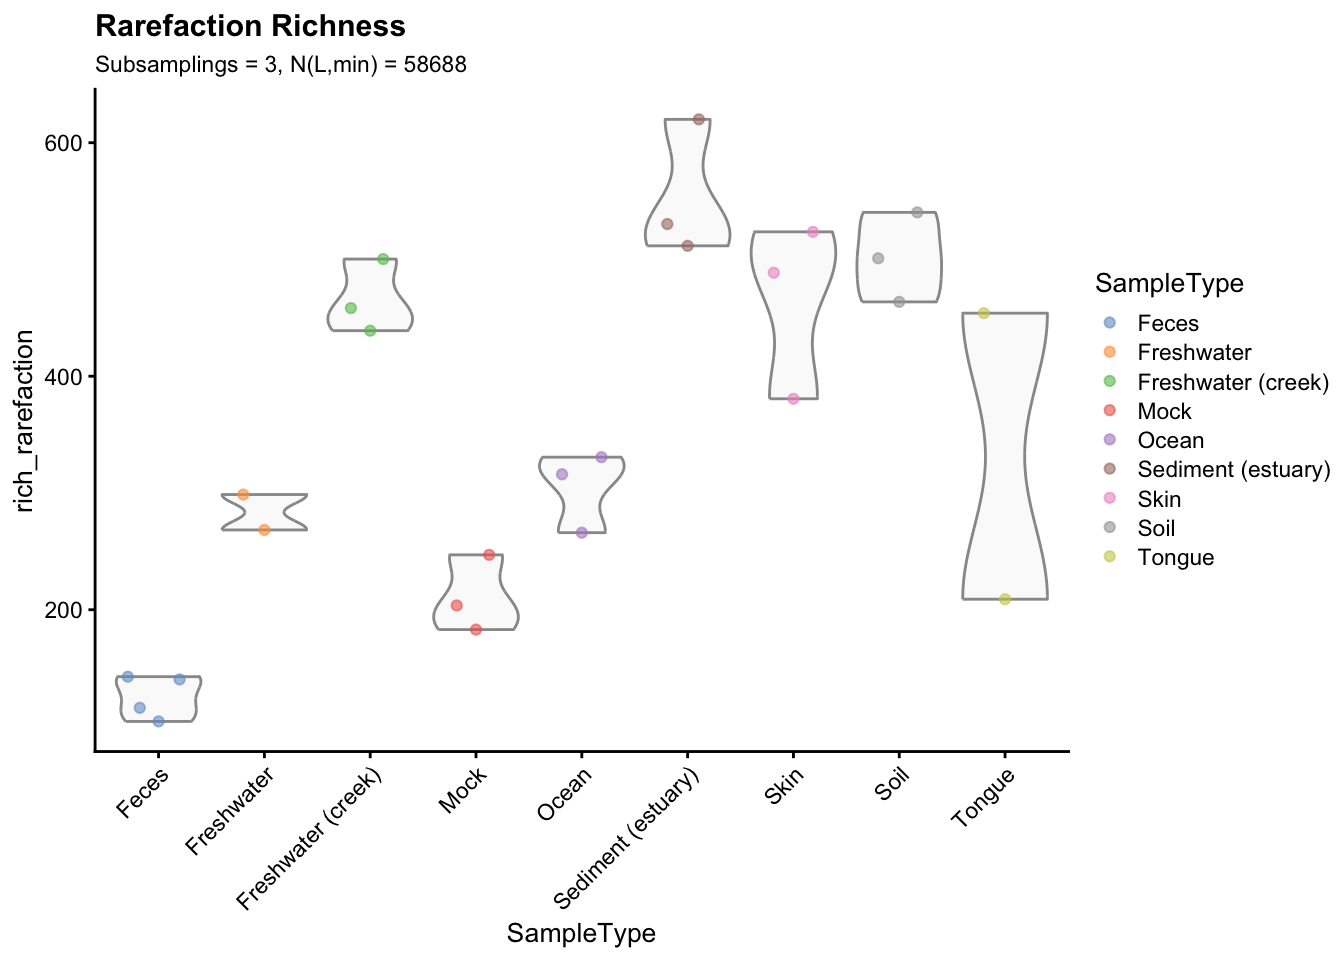 Richness estimates grouped and coloured by sample type. Richness indexes were averaged across the 3 subsamplings to obtain a single value for each sample.